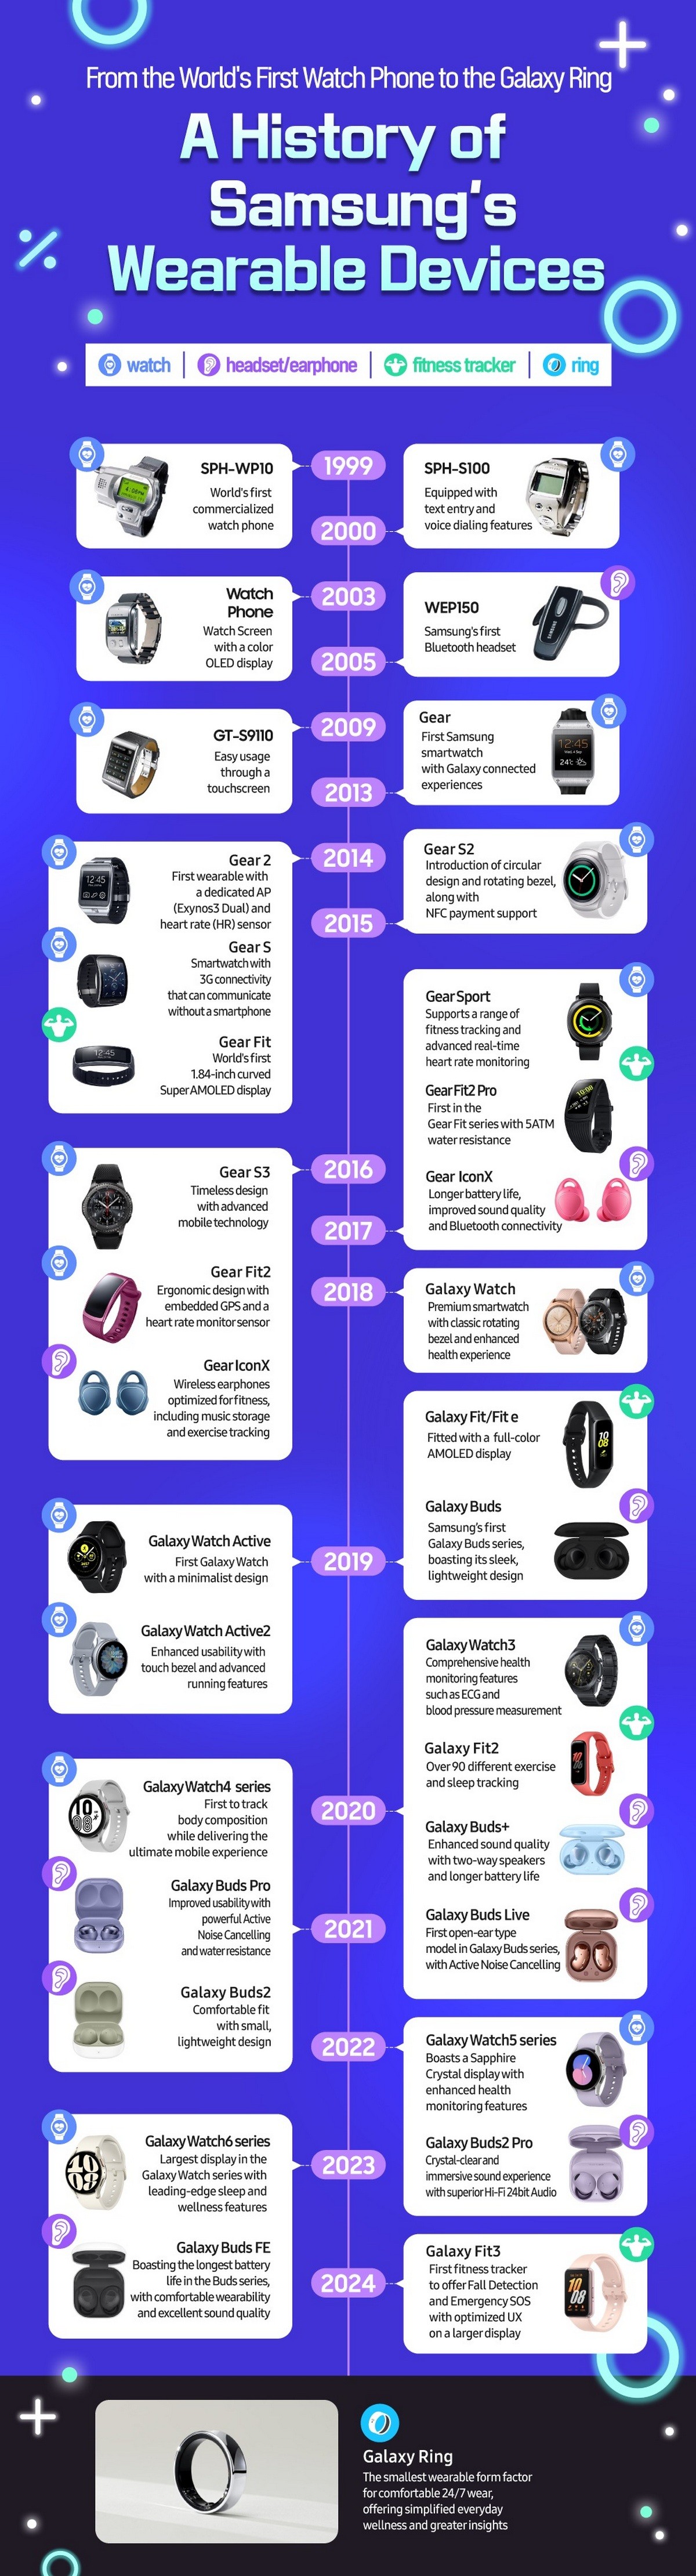 Samsung's latest infographic details the history of its wearables up to the Galaxy Ring